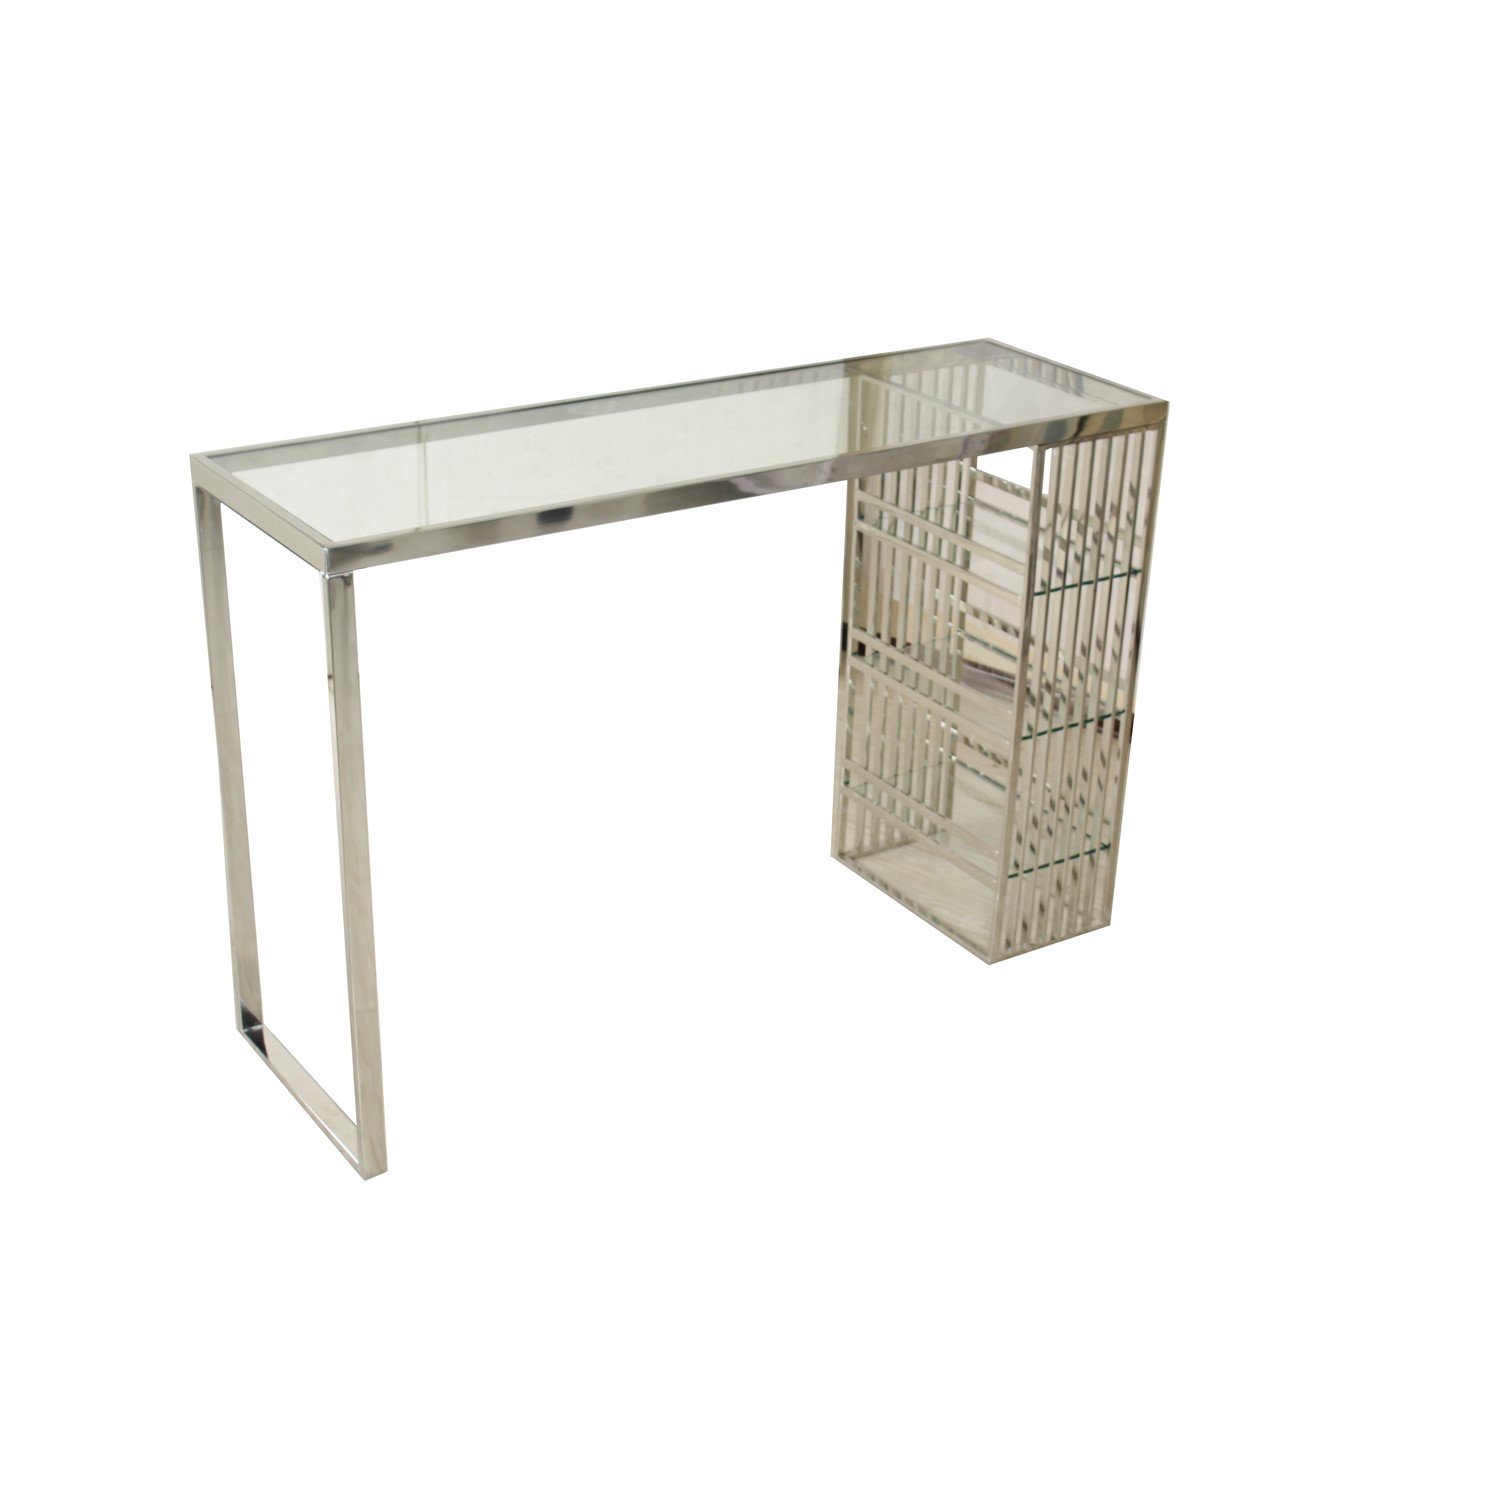 Photo of Chrome breakfast bar table with storage - seats 4